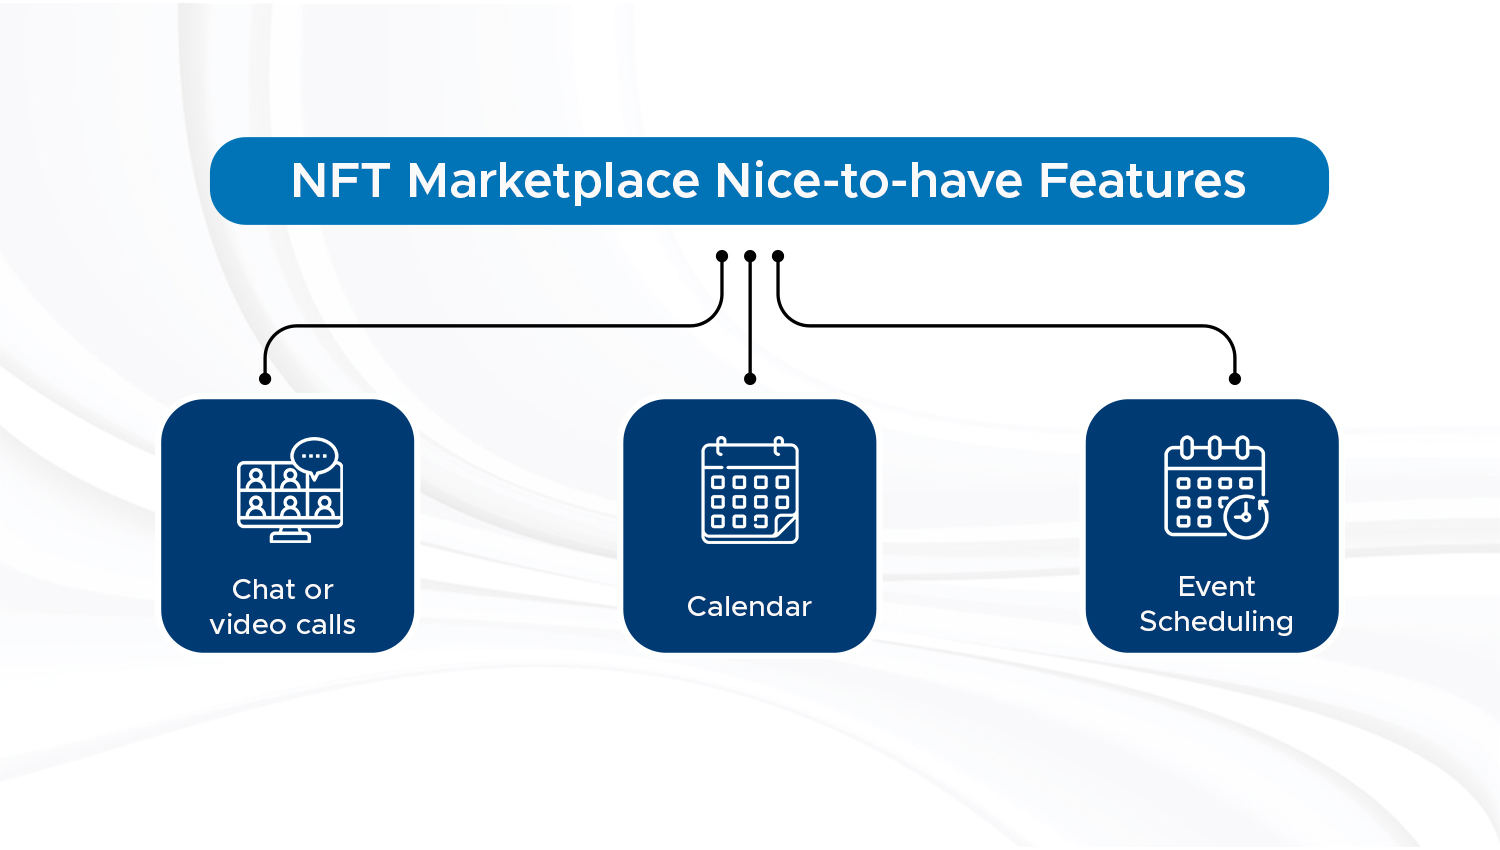 Additional NFT Marketplace Features